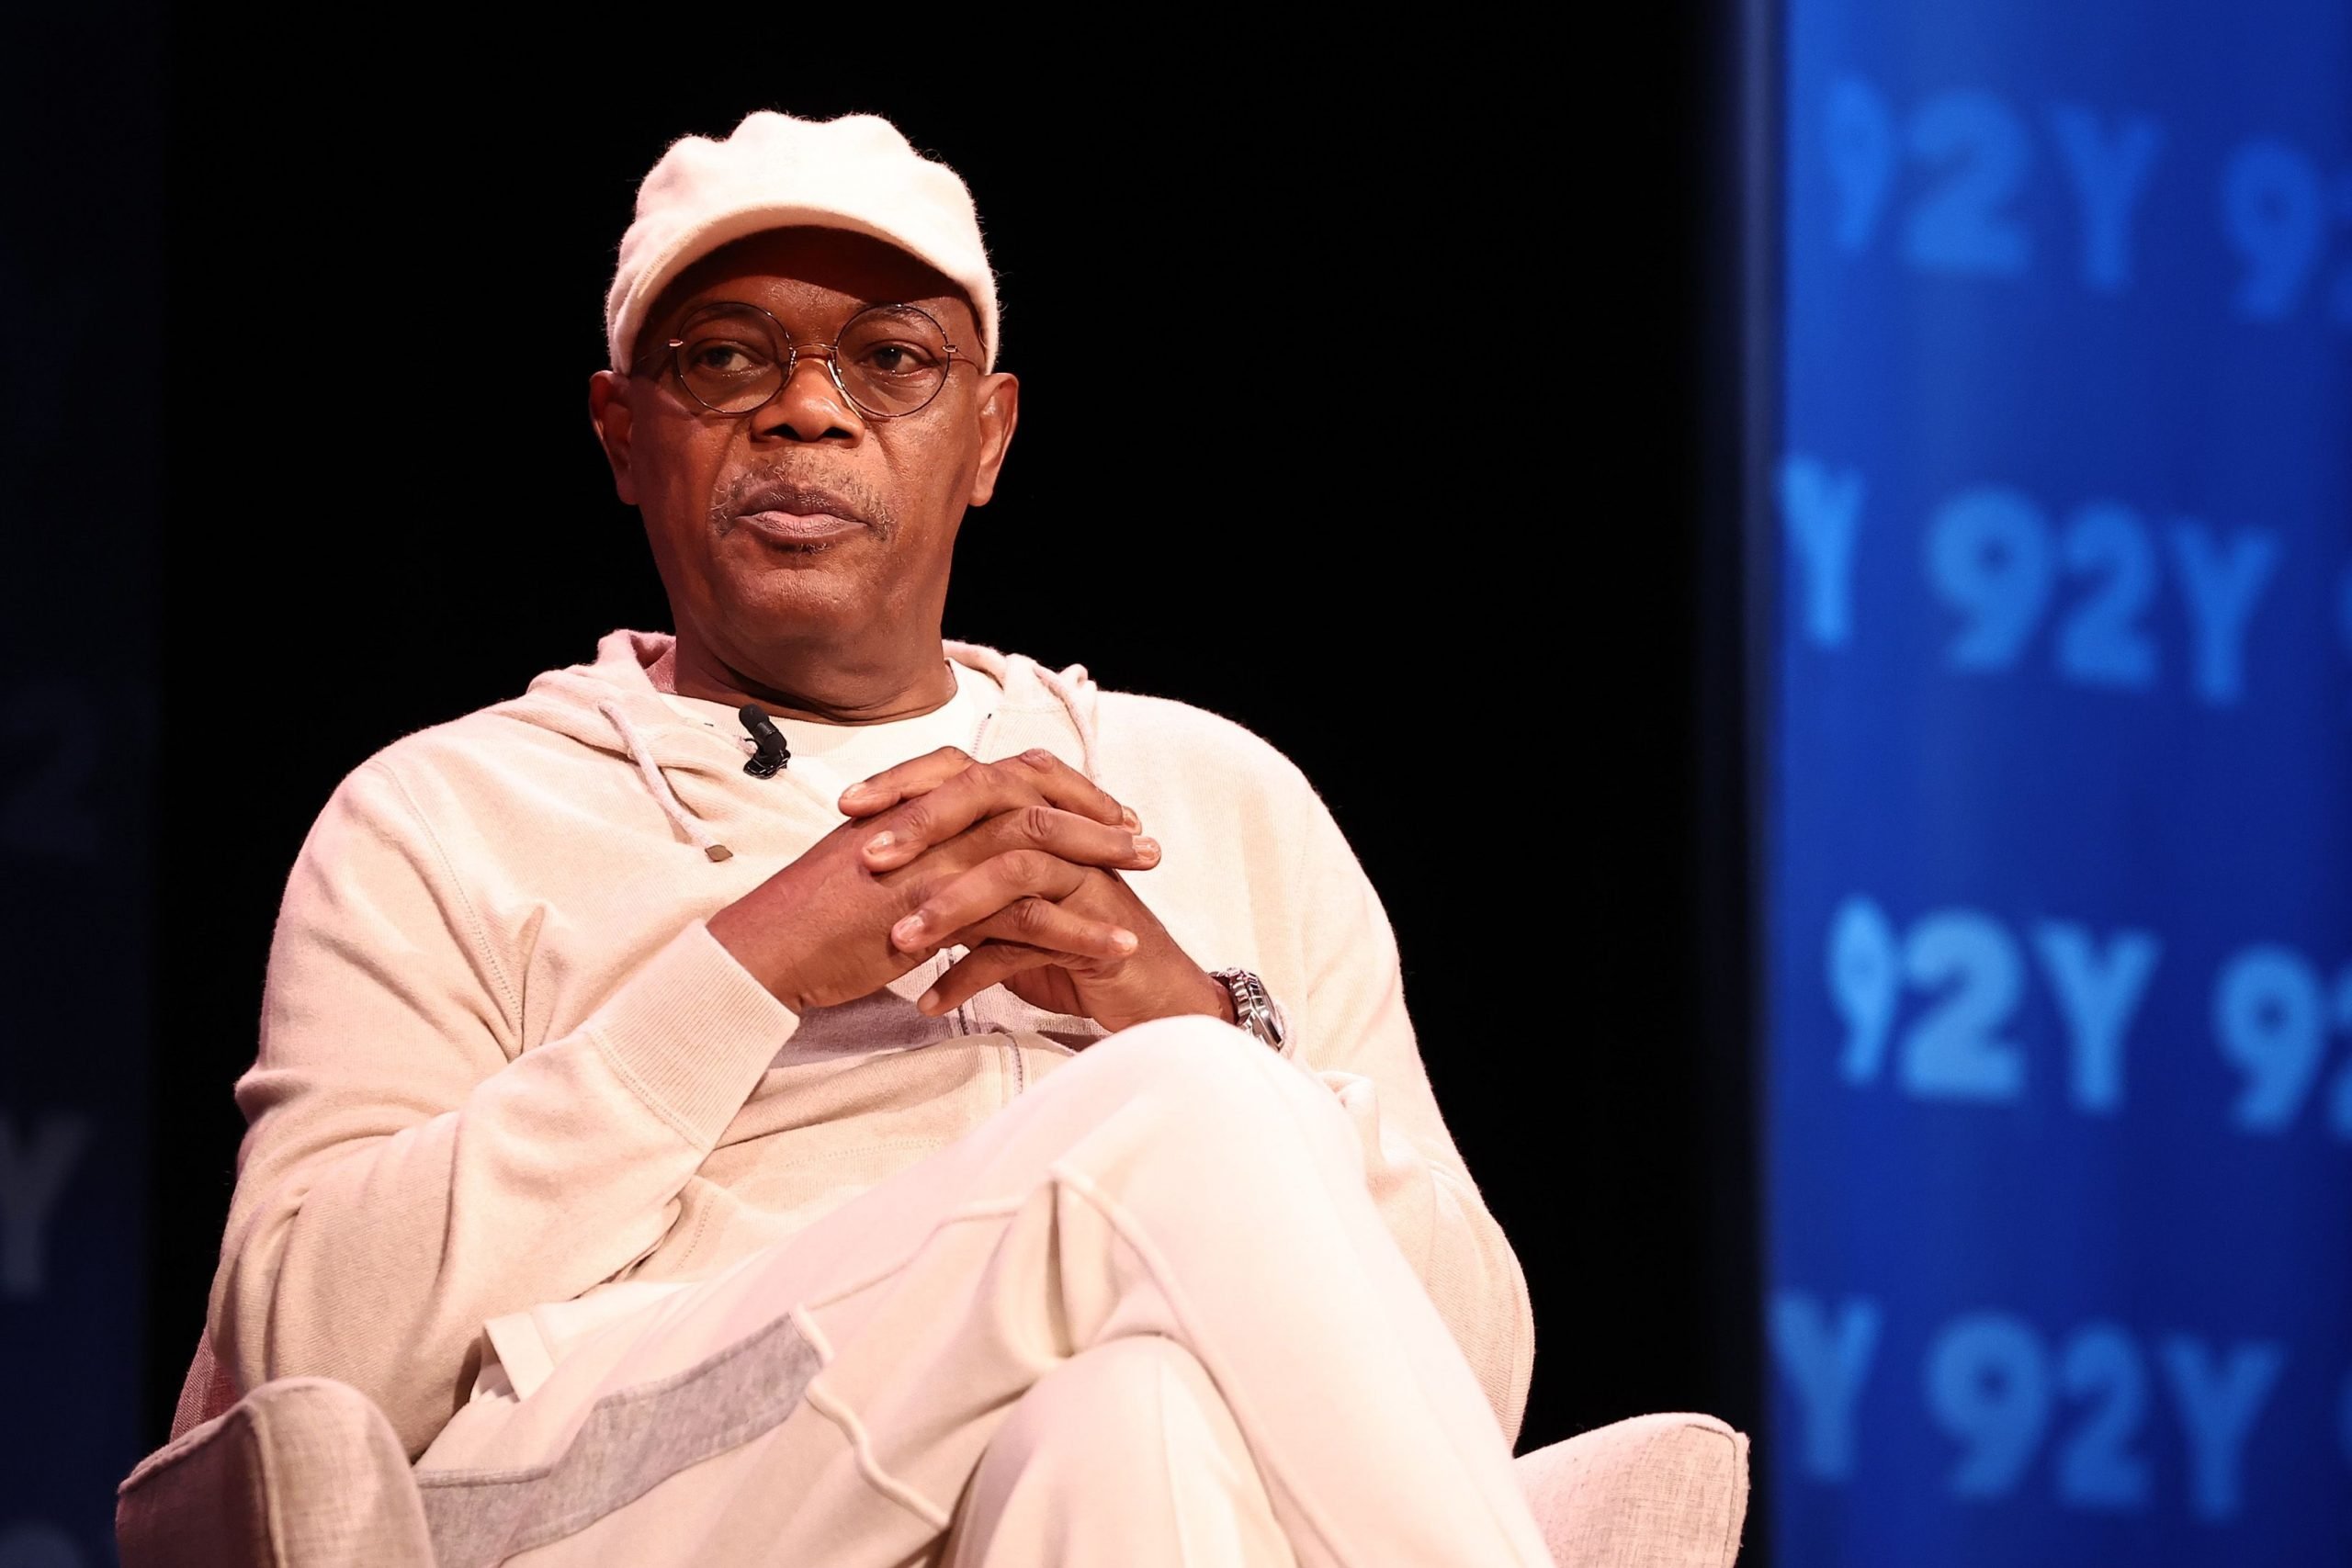 Samuel L. Jackson Can’t Believe Jonah Hill Beat Him For Most Onscreen Profanity, ‘That’s Some Bulls***’